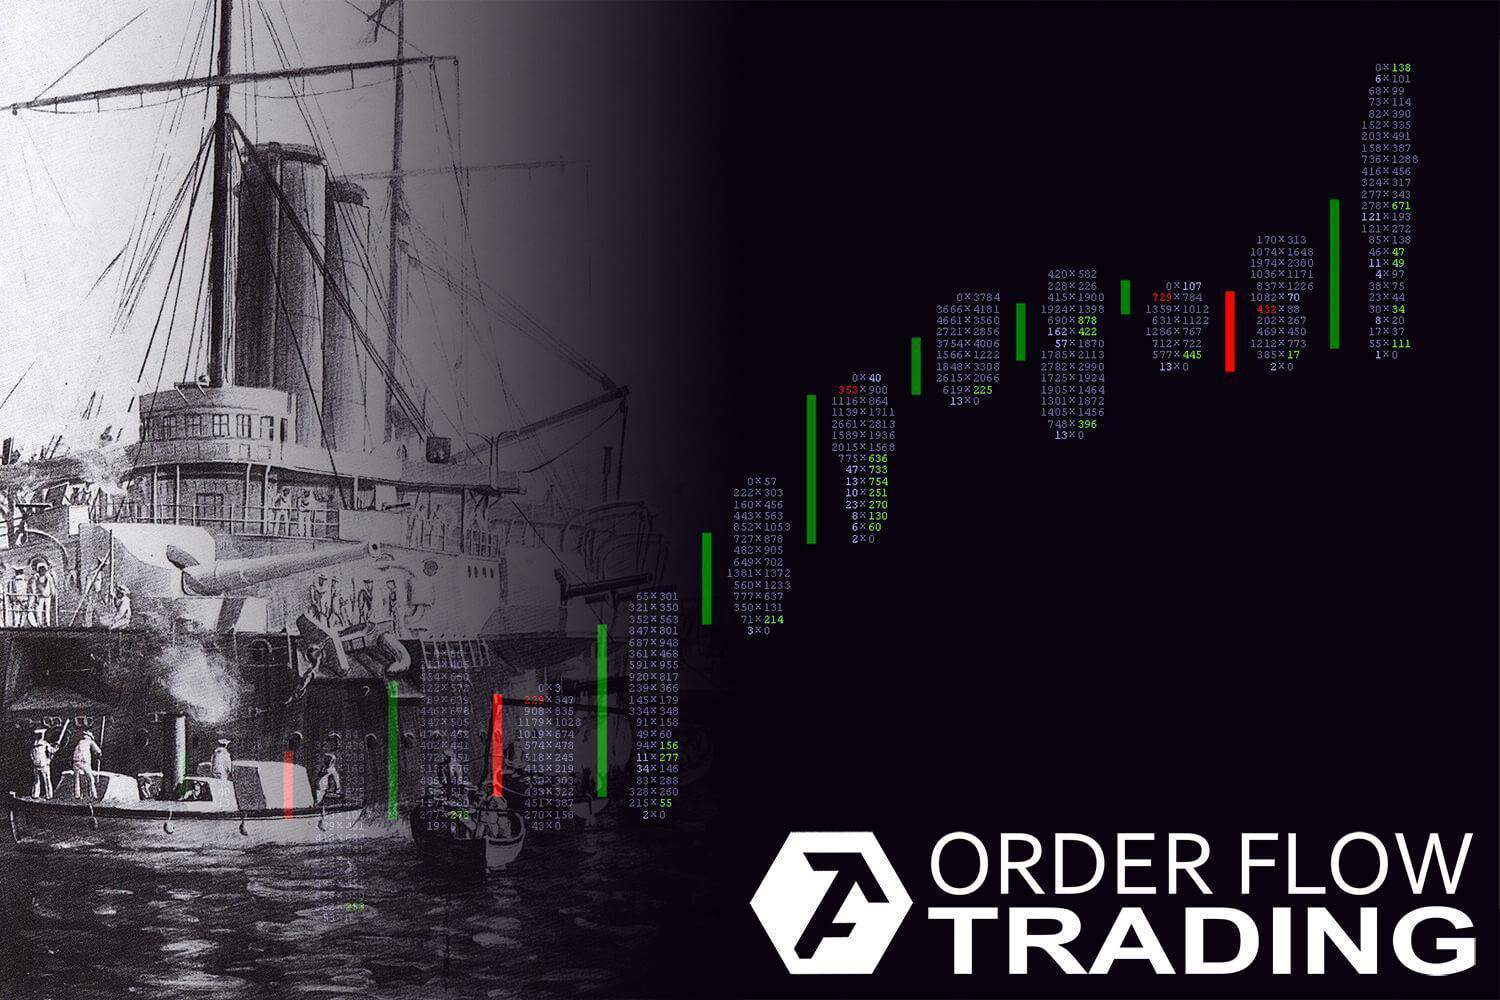 Imbalance: trade on the side of superior forces